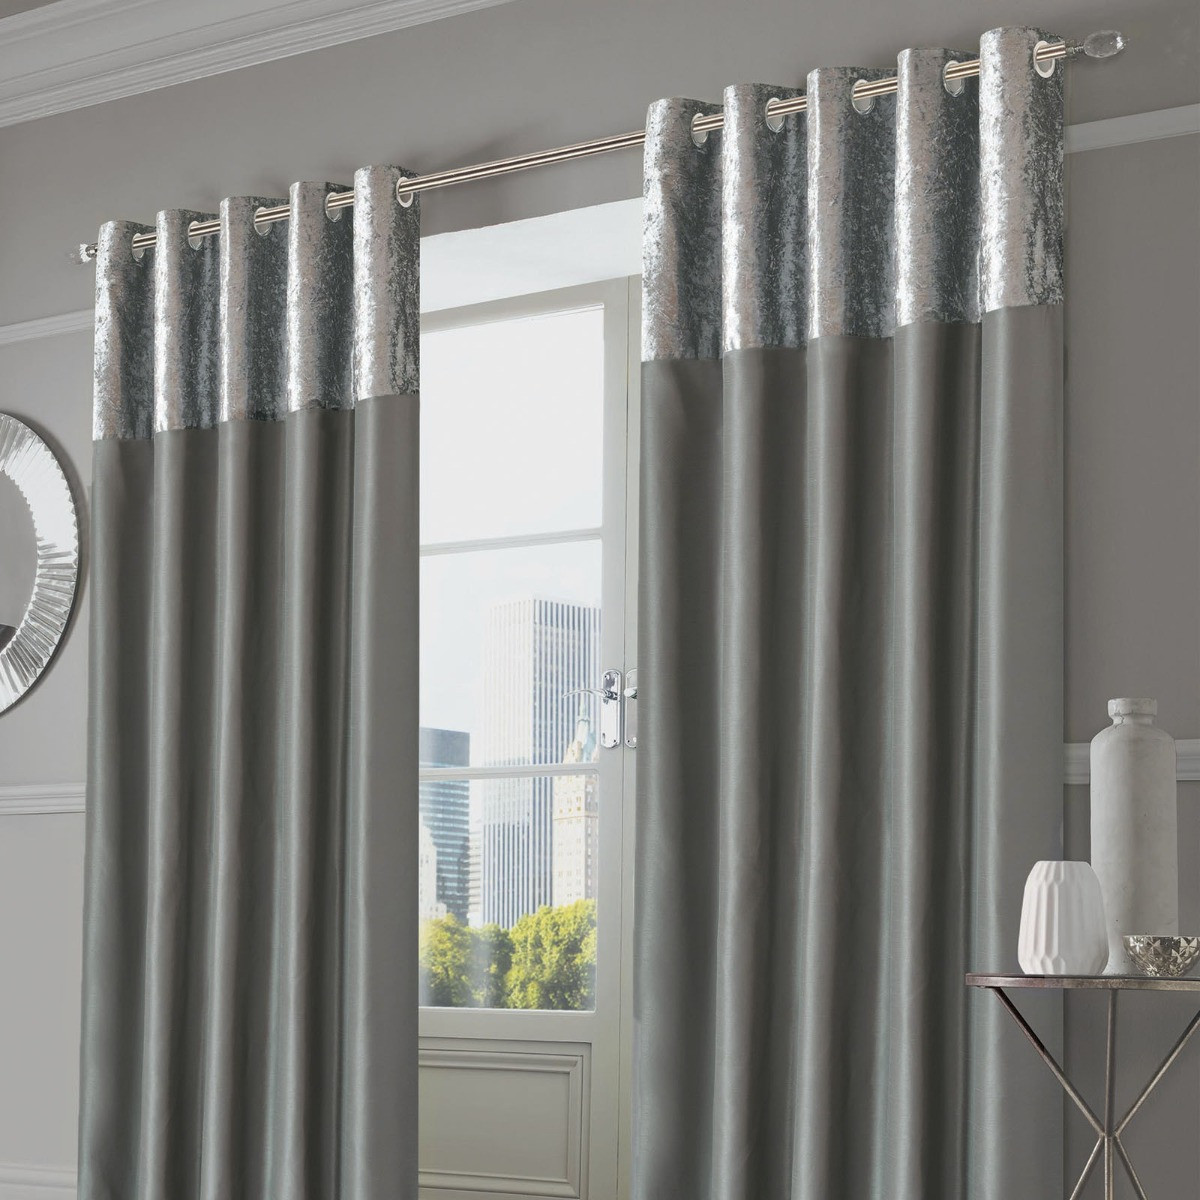 Sienna Home Crushed Velvet Band Eyelet Curtains, Silver Grey - 46"x54">